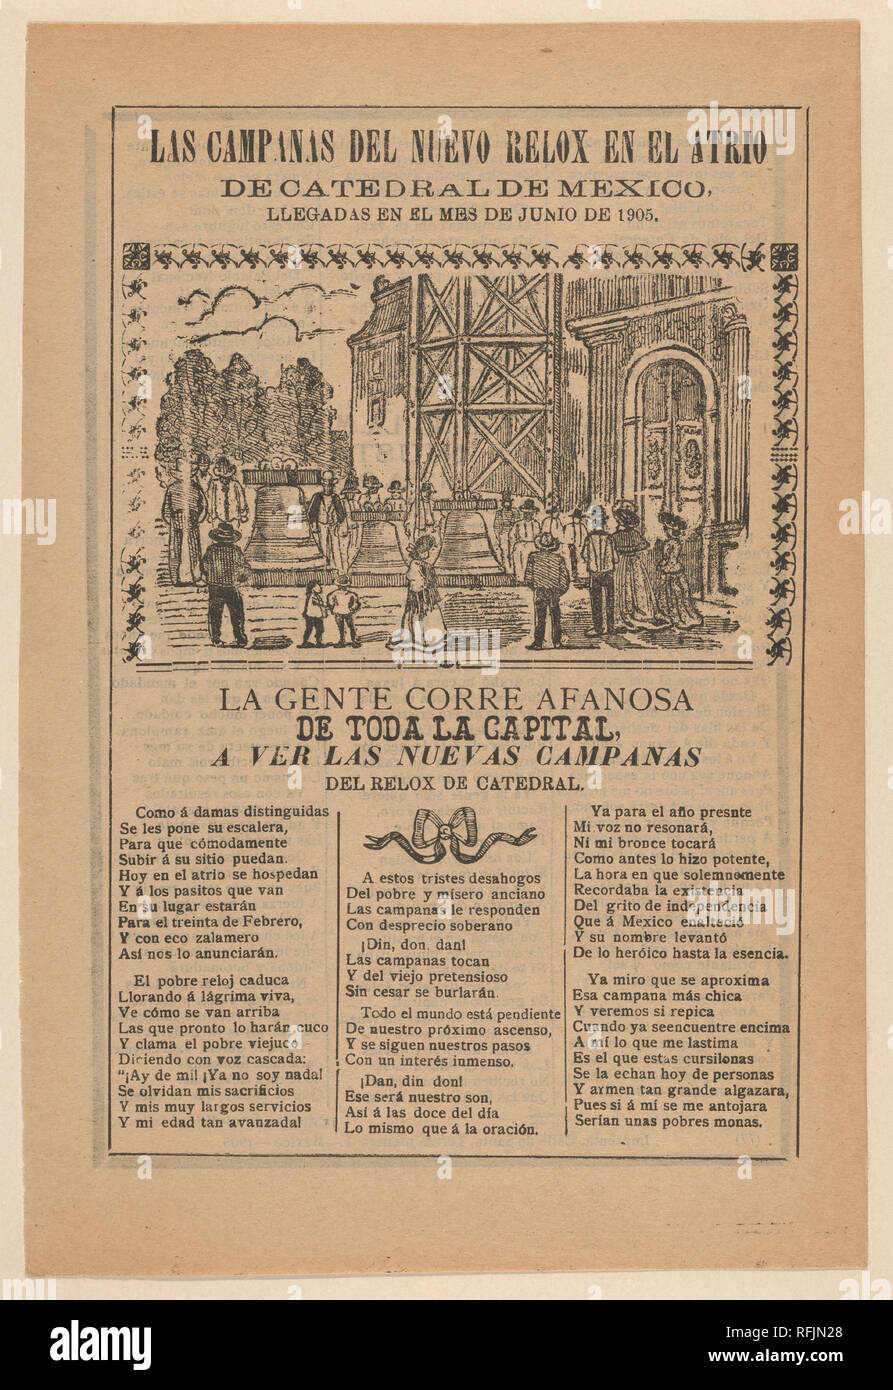 Broadsheet relating to the new clock installed in the cathedral in Mexico City in June 1905. Artist: José Guadalupe Posada (Mexican, 1851-1913). Dimensions: Sheet: 11 5/8 × 7 7/8 in. (29.5 × 20 cm). Publisher: Antonio Vanegas Arroyo (1850-1917, Mexican). Date: 1905. Museum: Metropolitan Museum of Art, New York, USA. Stock Photo